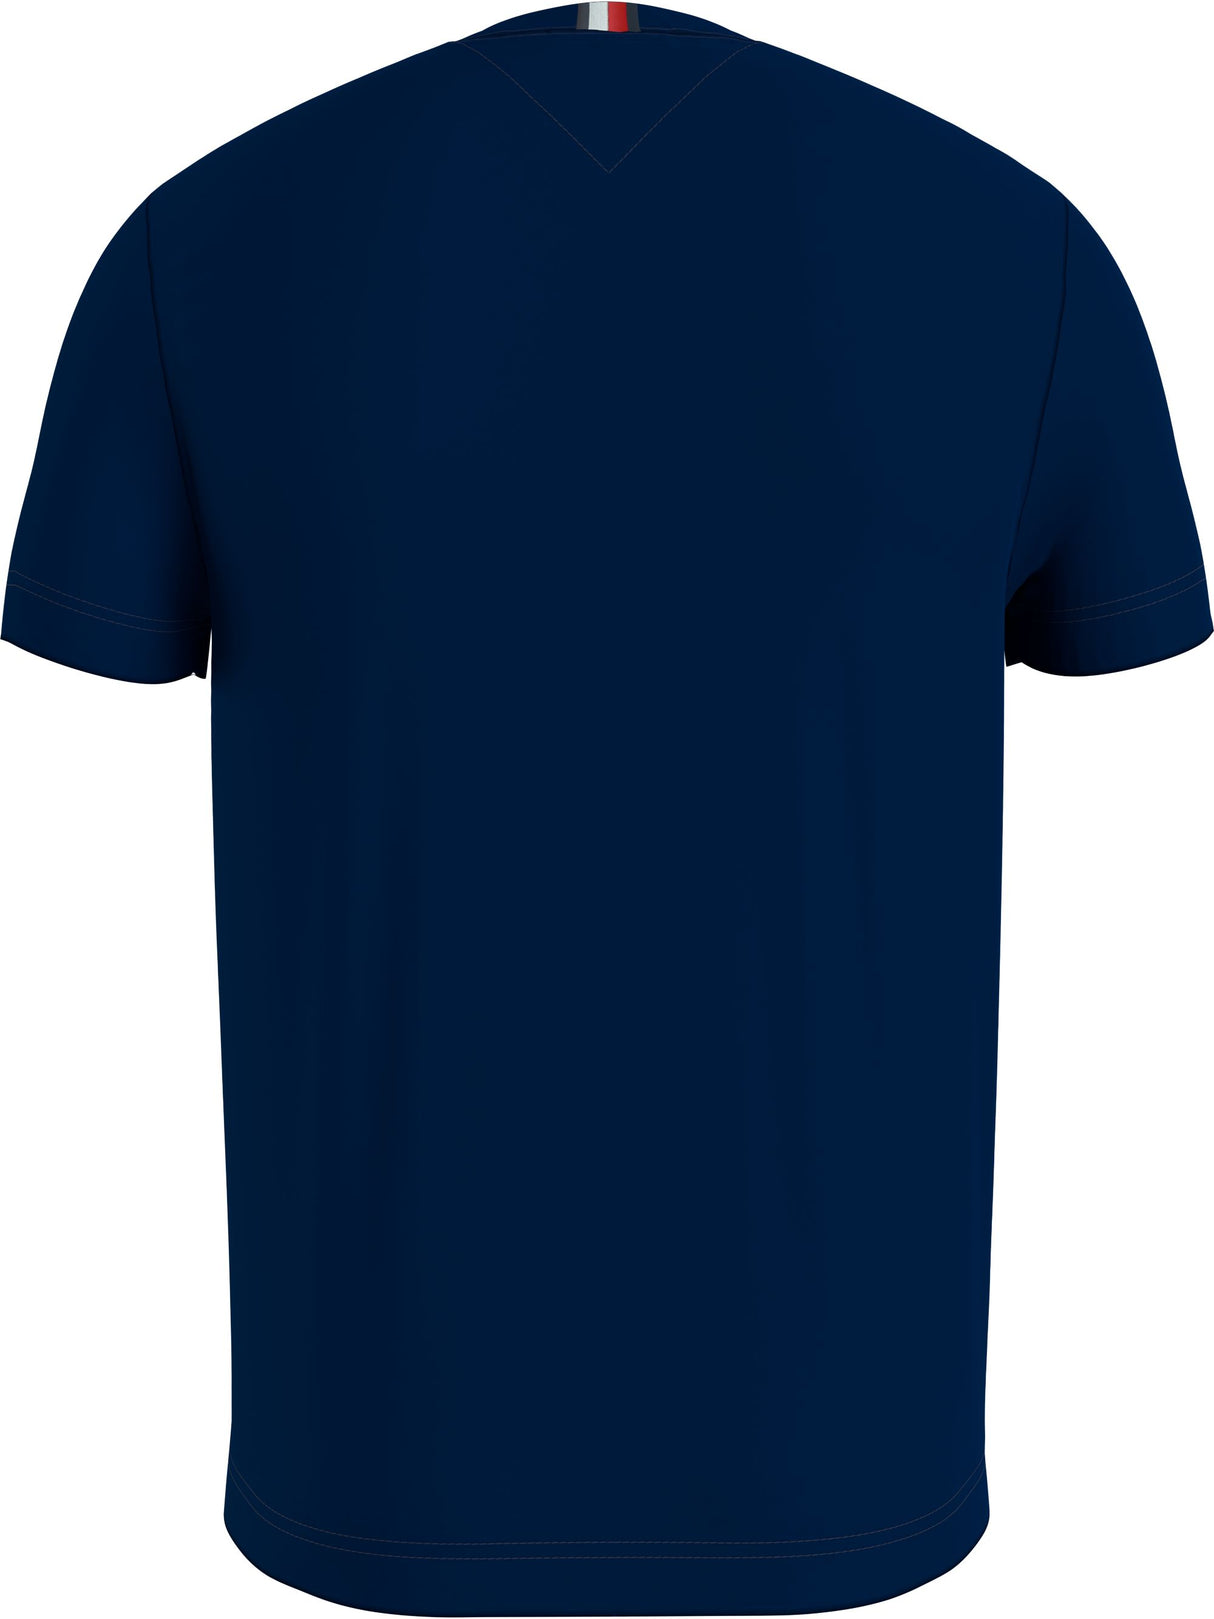 Tommy Hilfiger Navy Palm Tee Navy